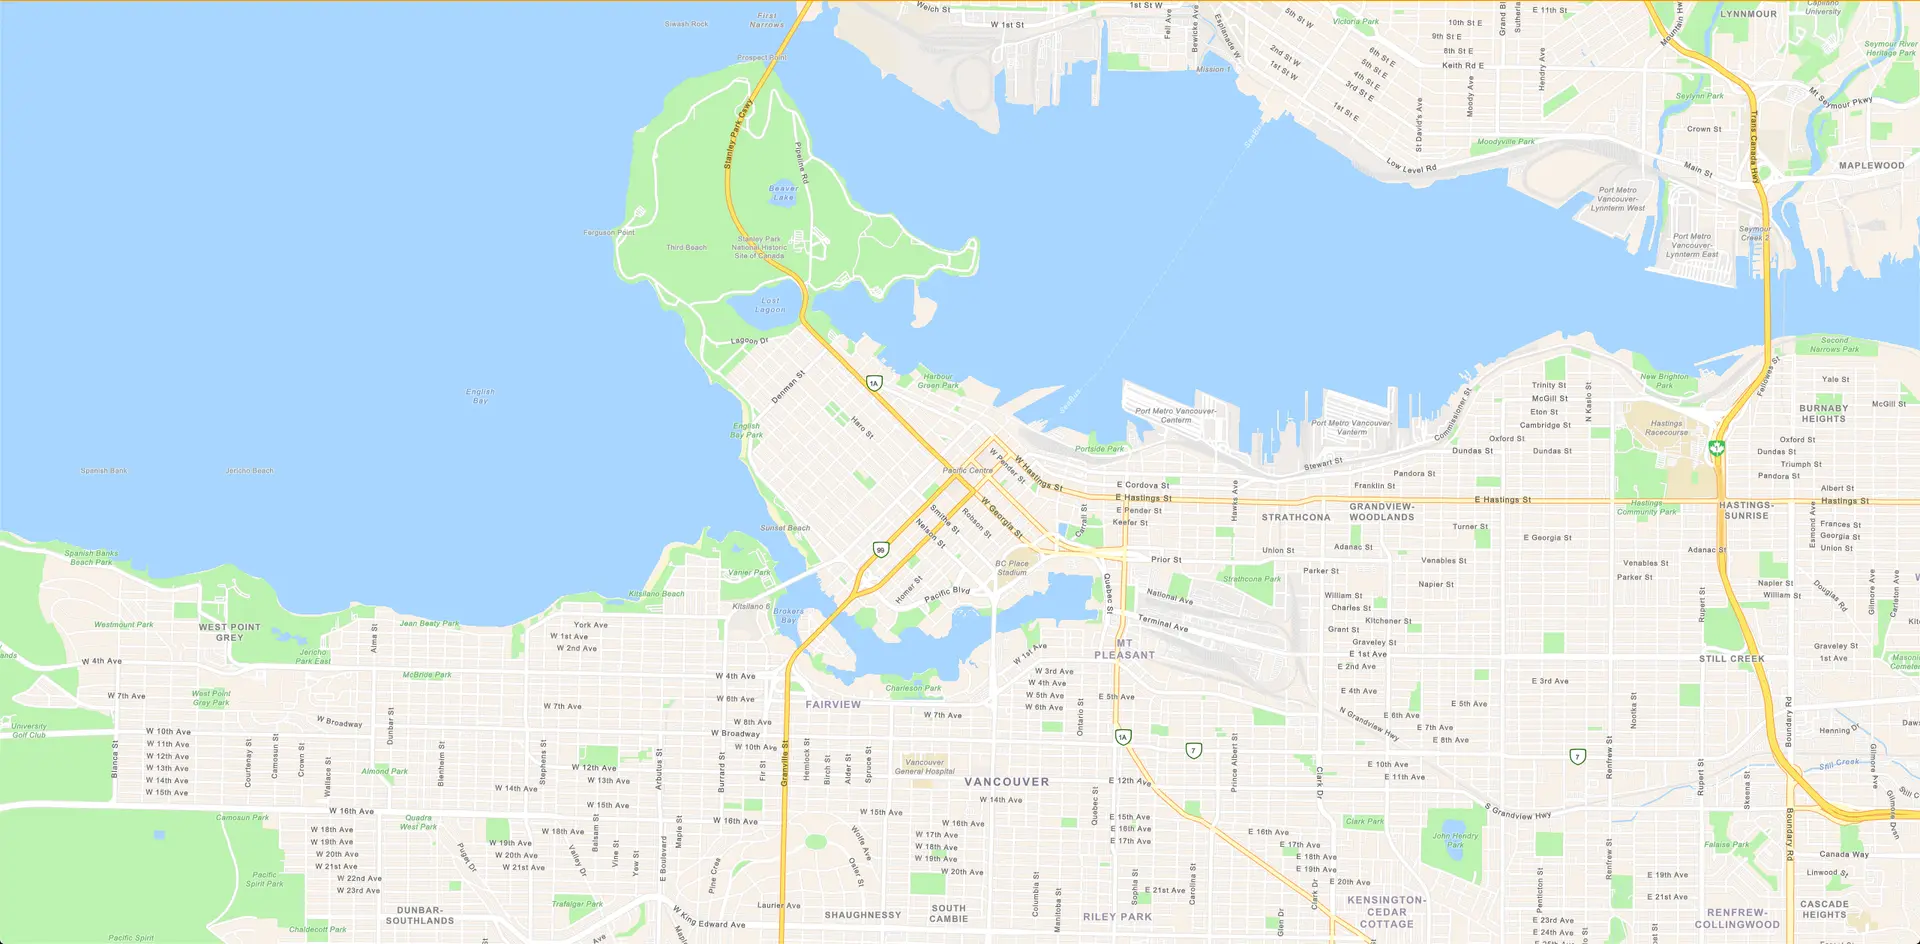 A map centered on Vancouver